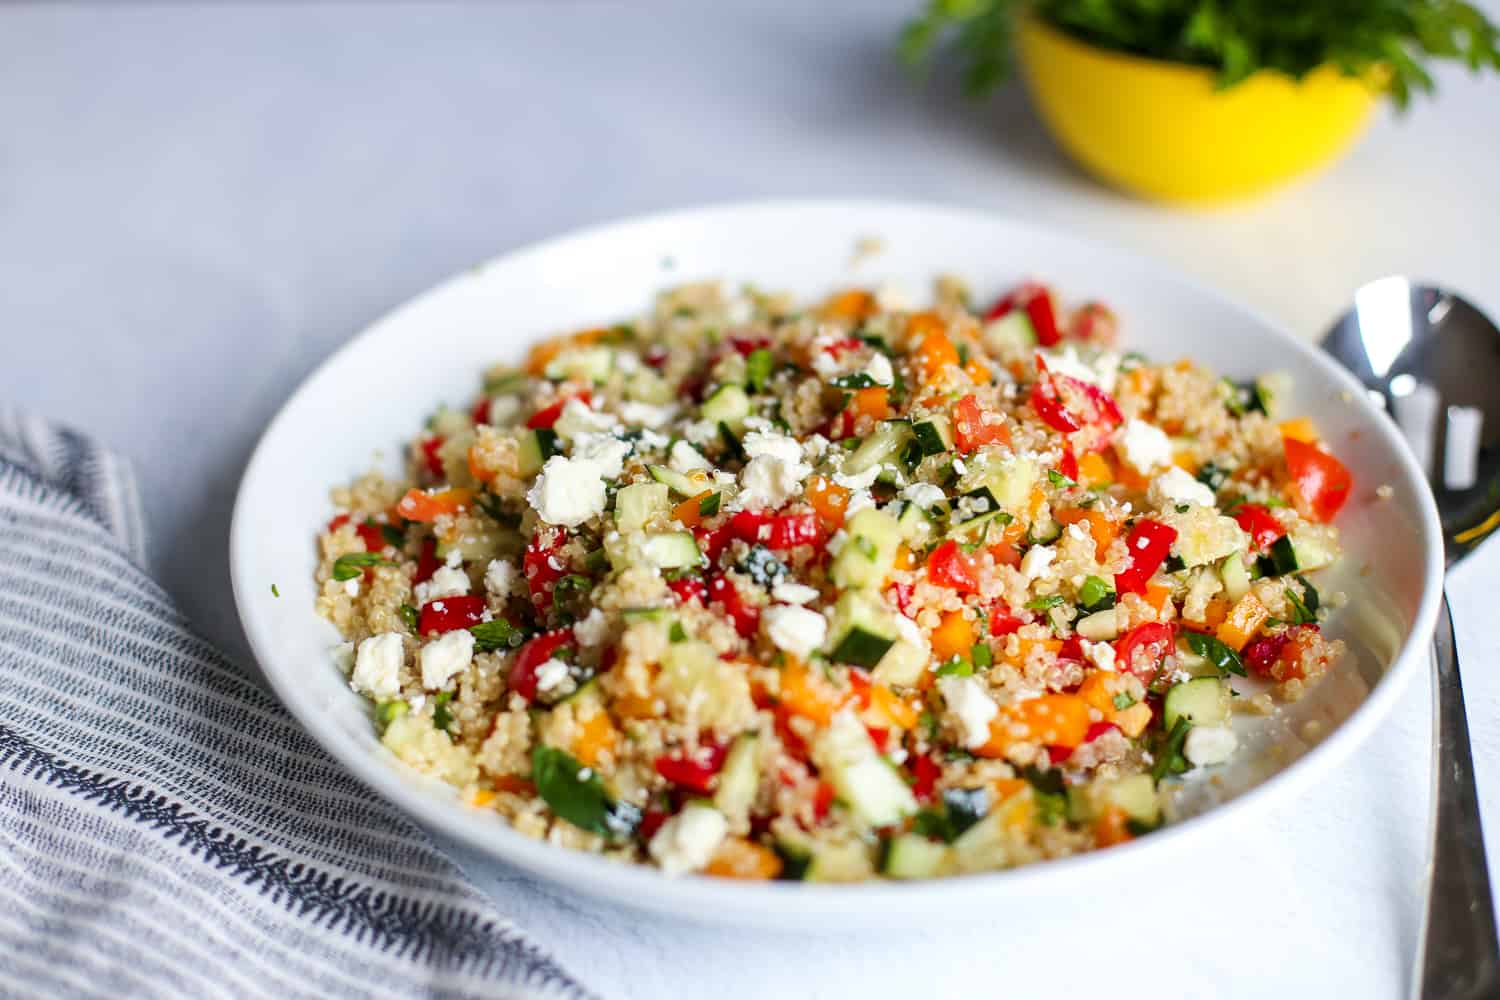 Quinoa tabbouleh salad in a white bowl.